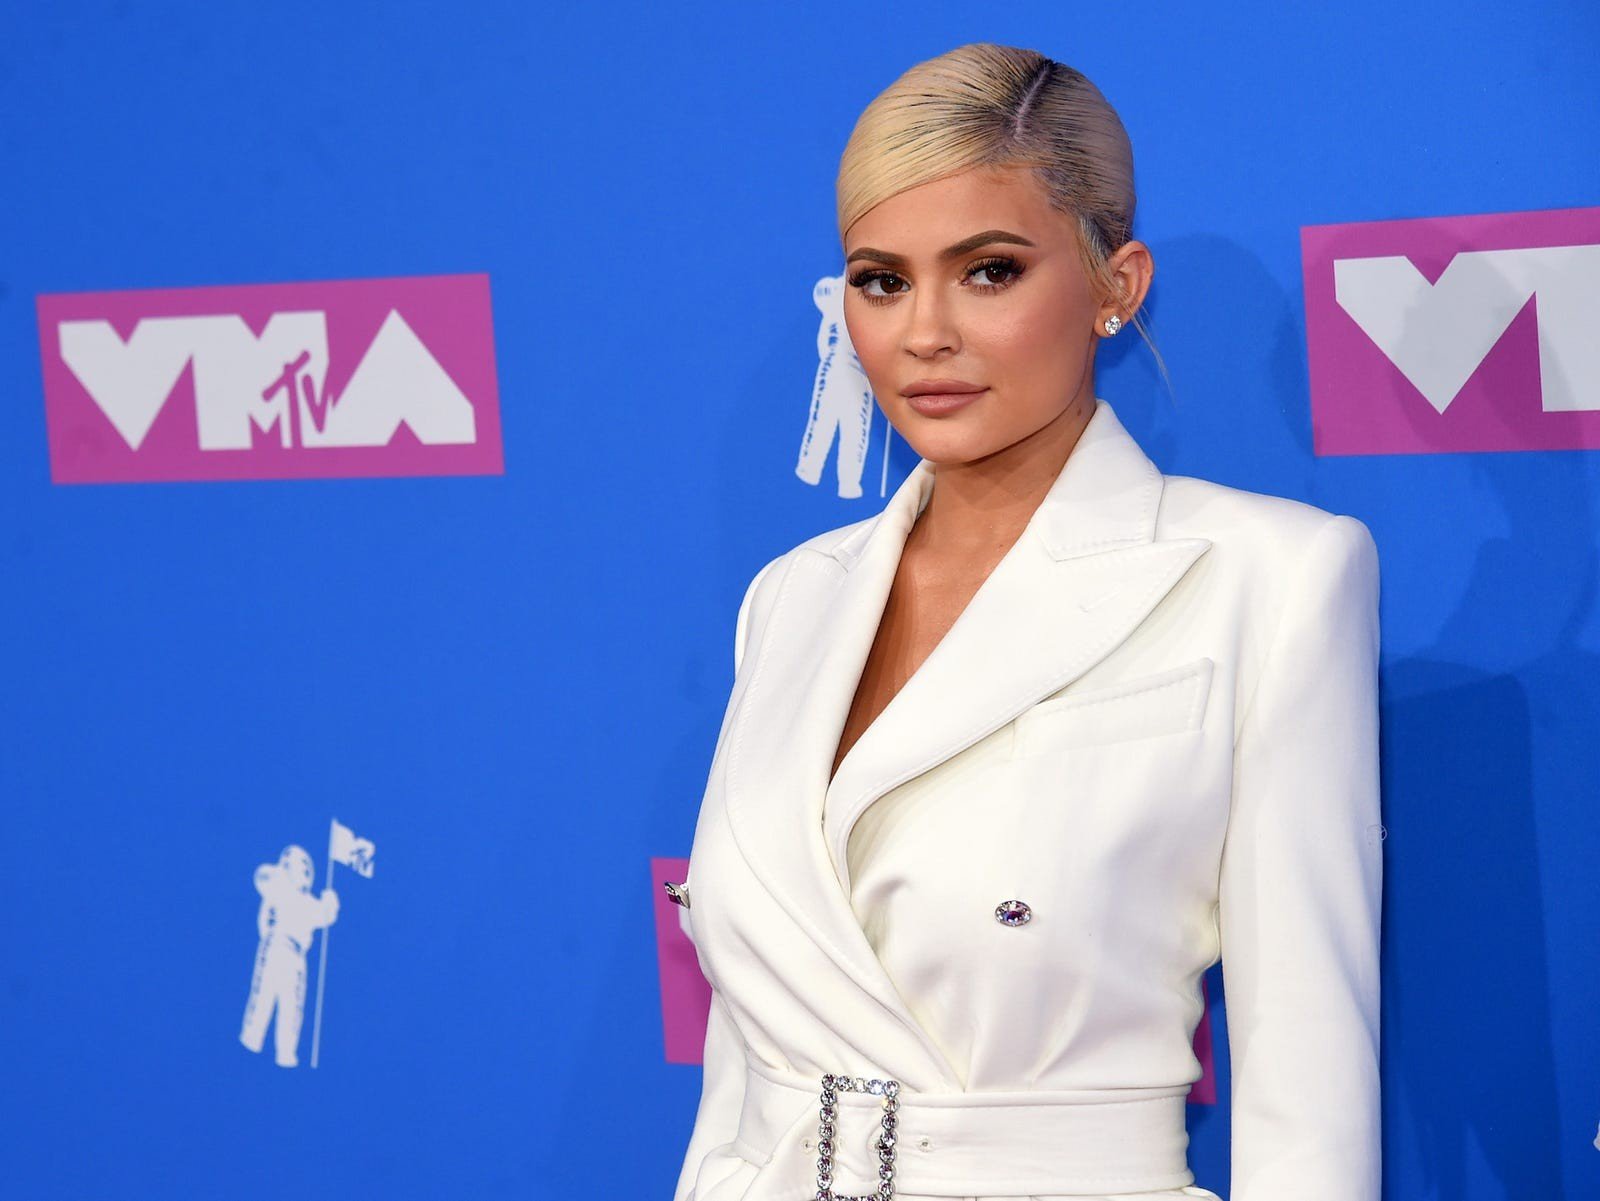 What's Kylie Jenner's Net Worth? How She Spends Her $1 Billion Fortune